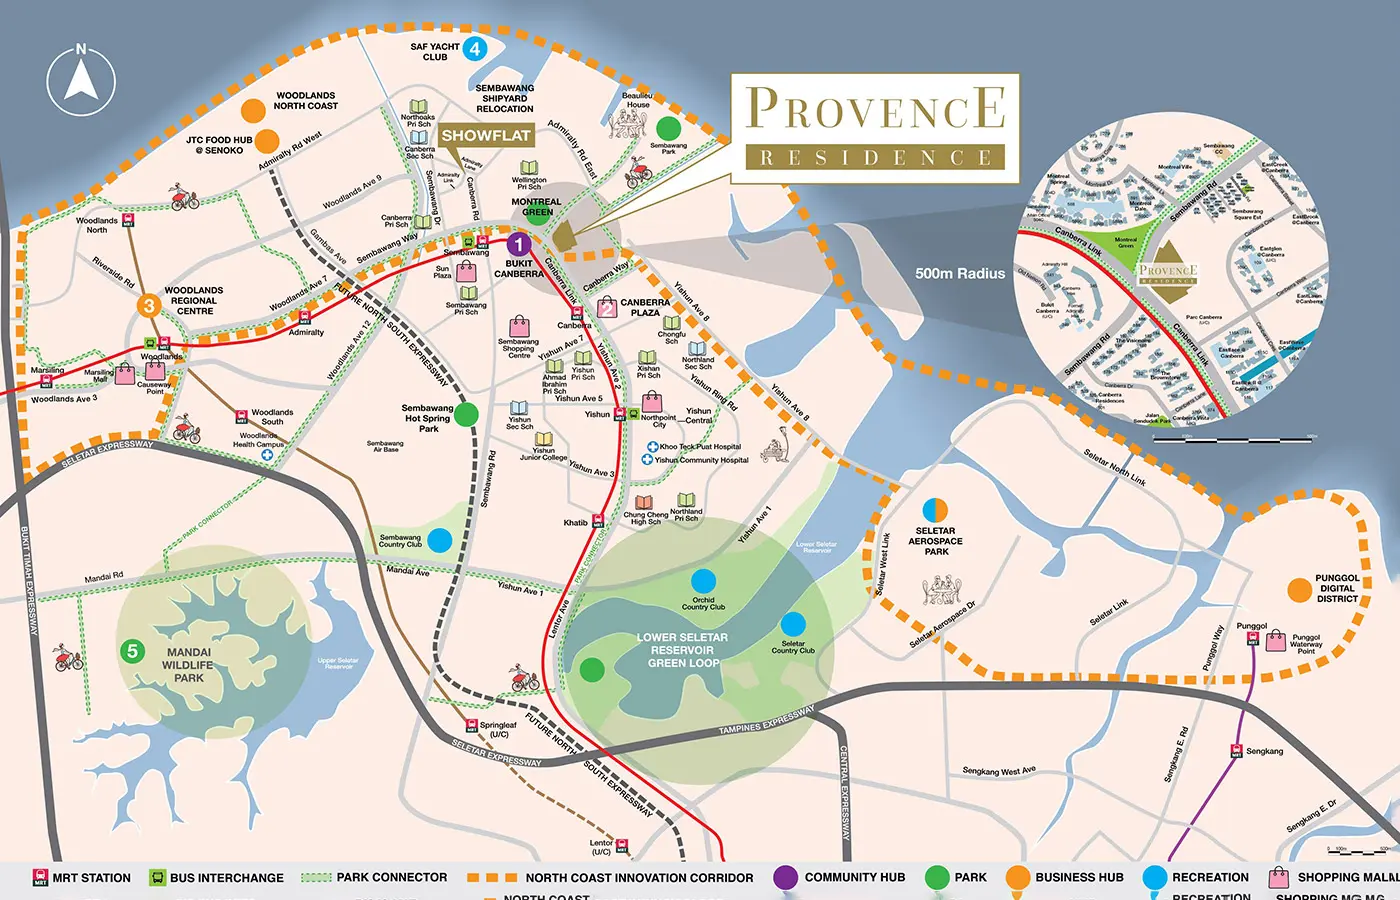 Provence Residence EC Location - Location Map